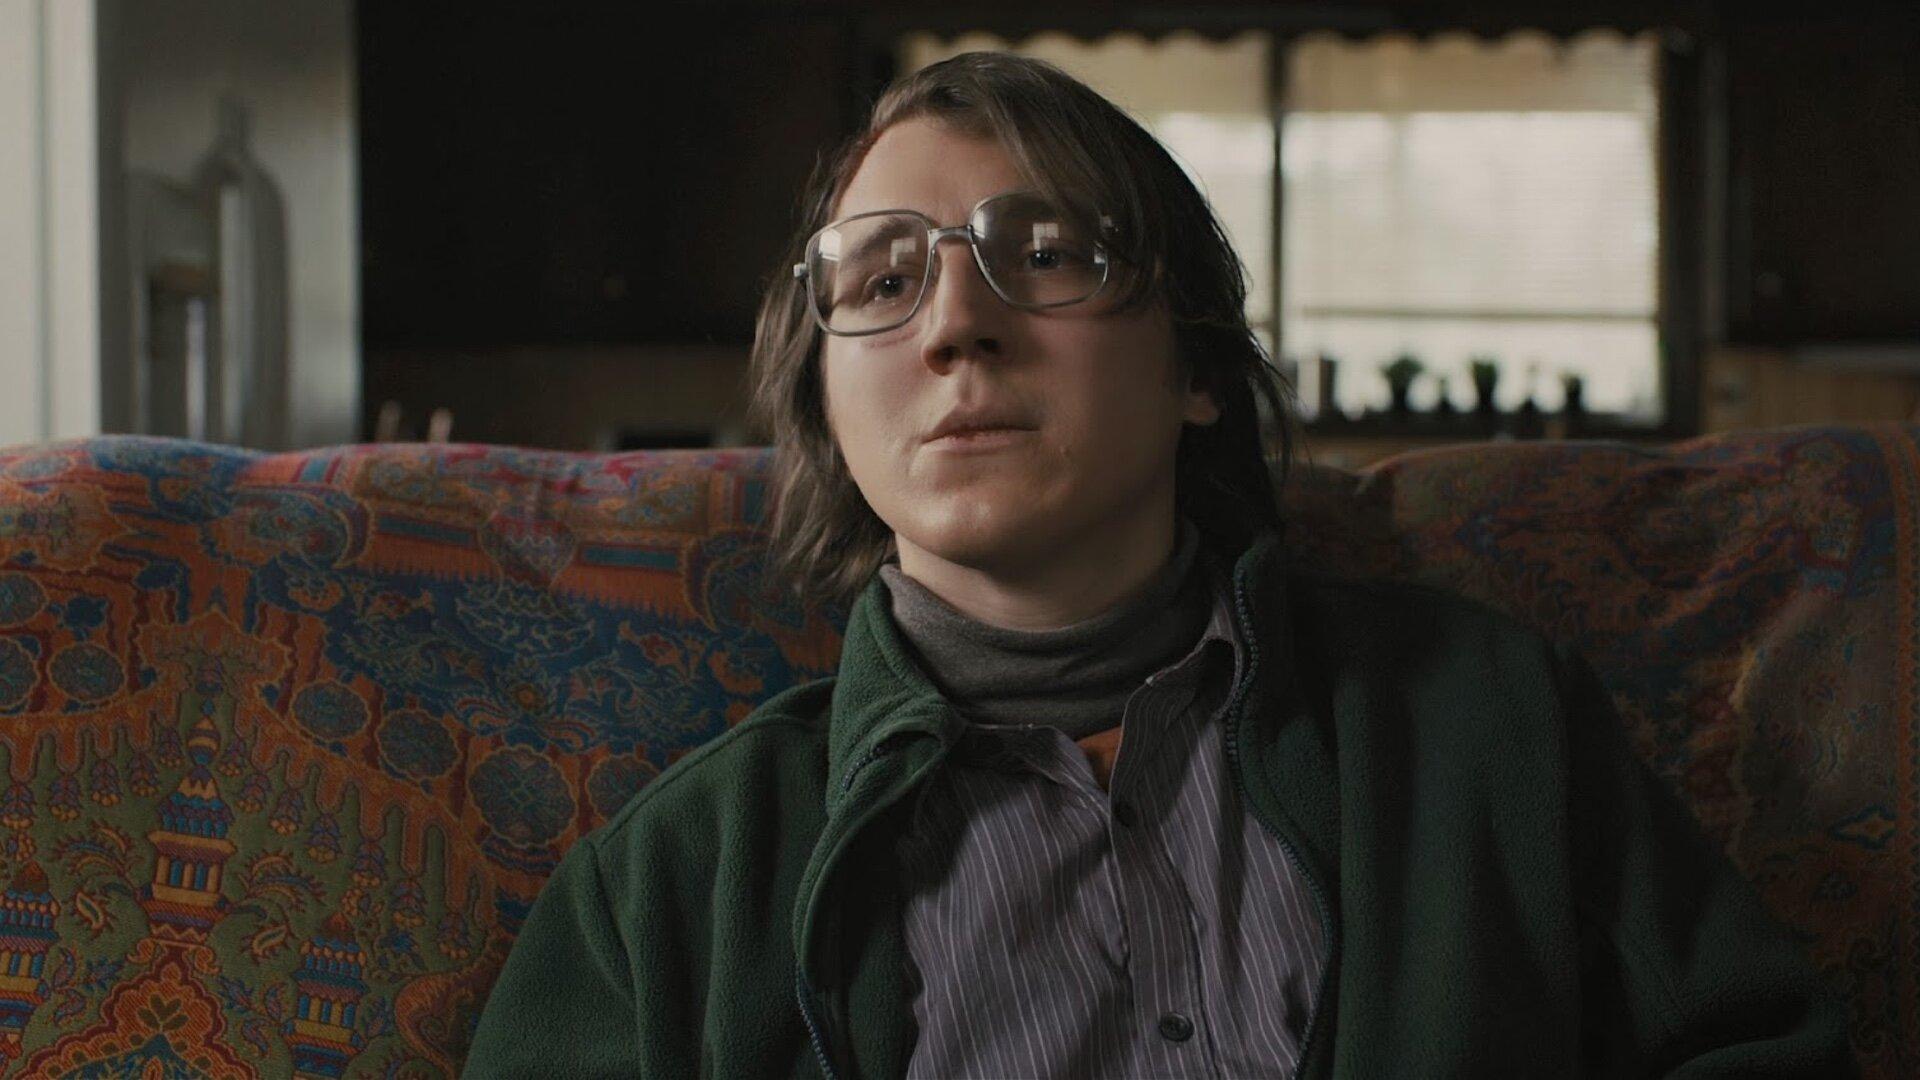 Paul Dano is Set To Play The Riddler in Matt Reeves' THE